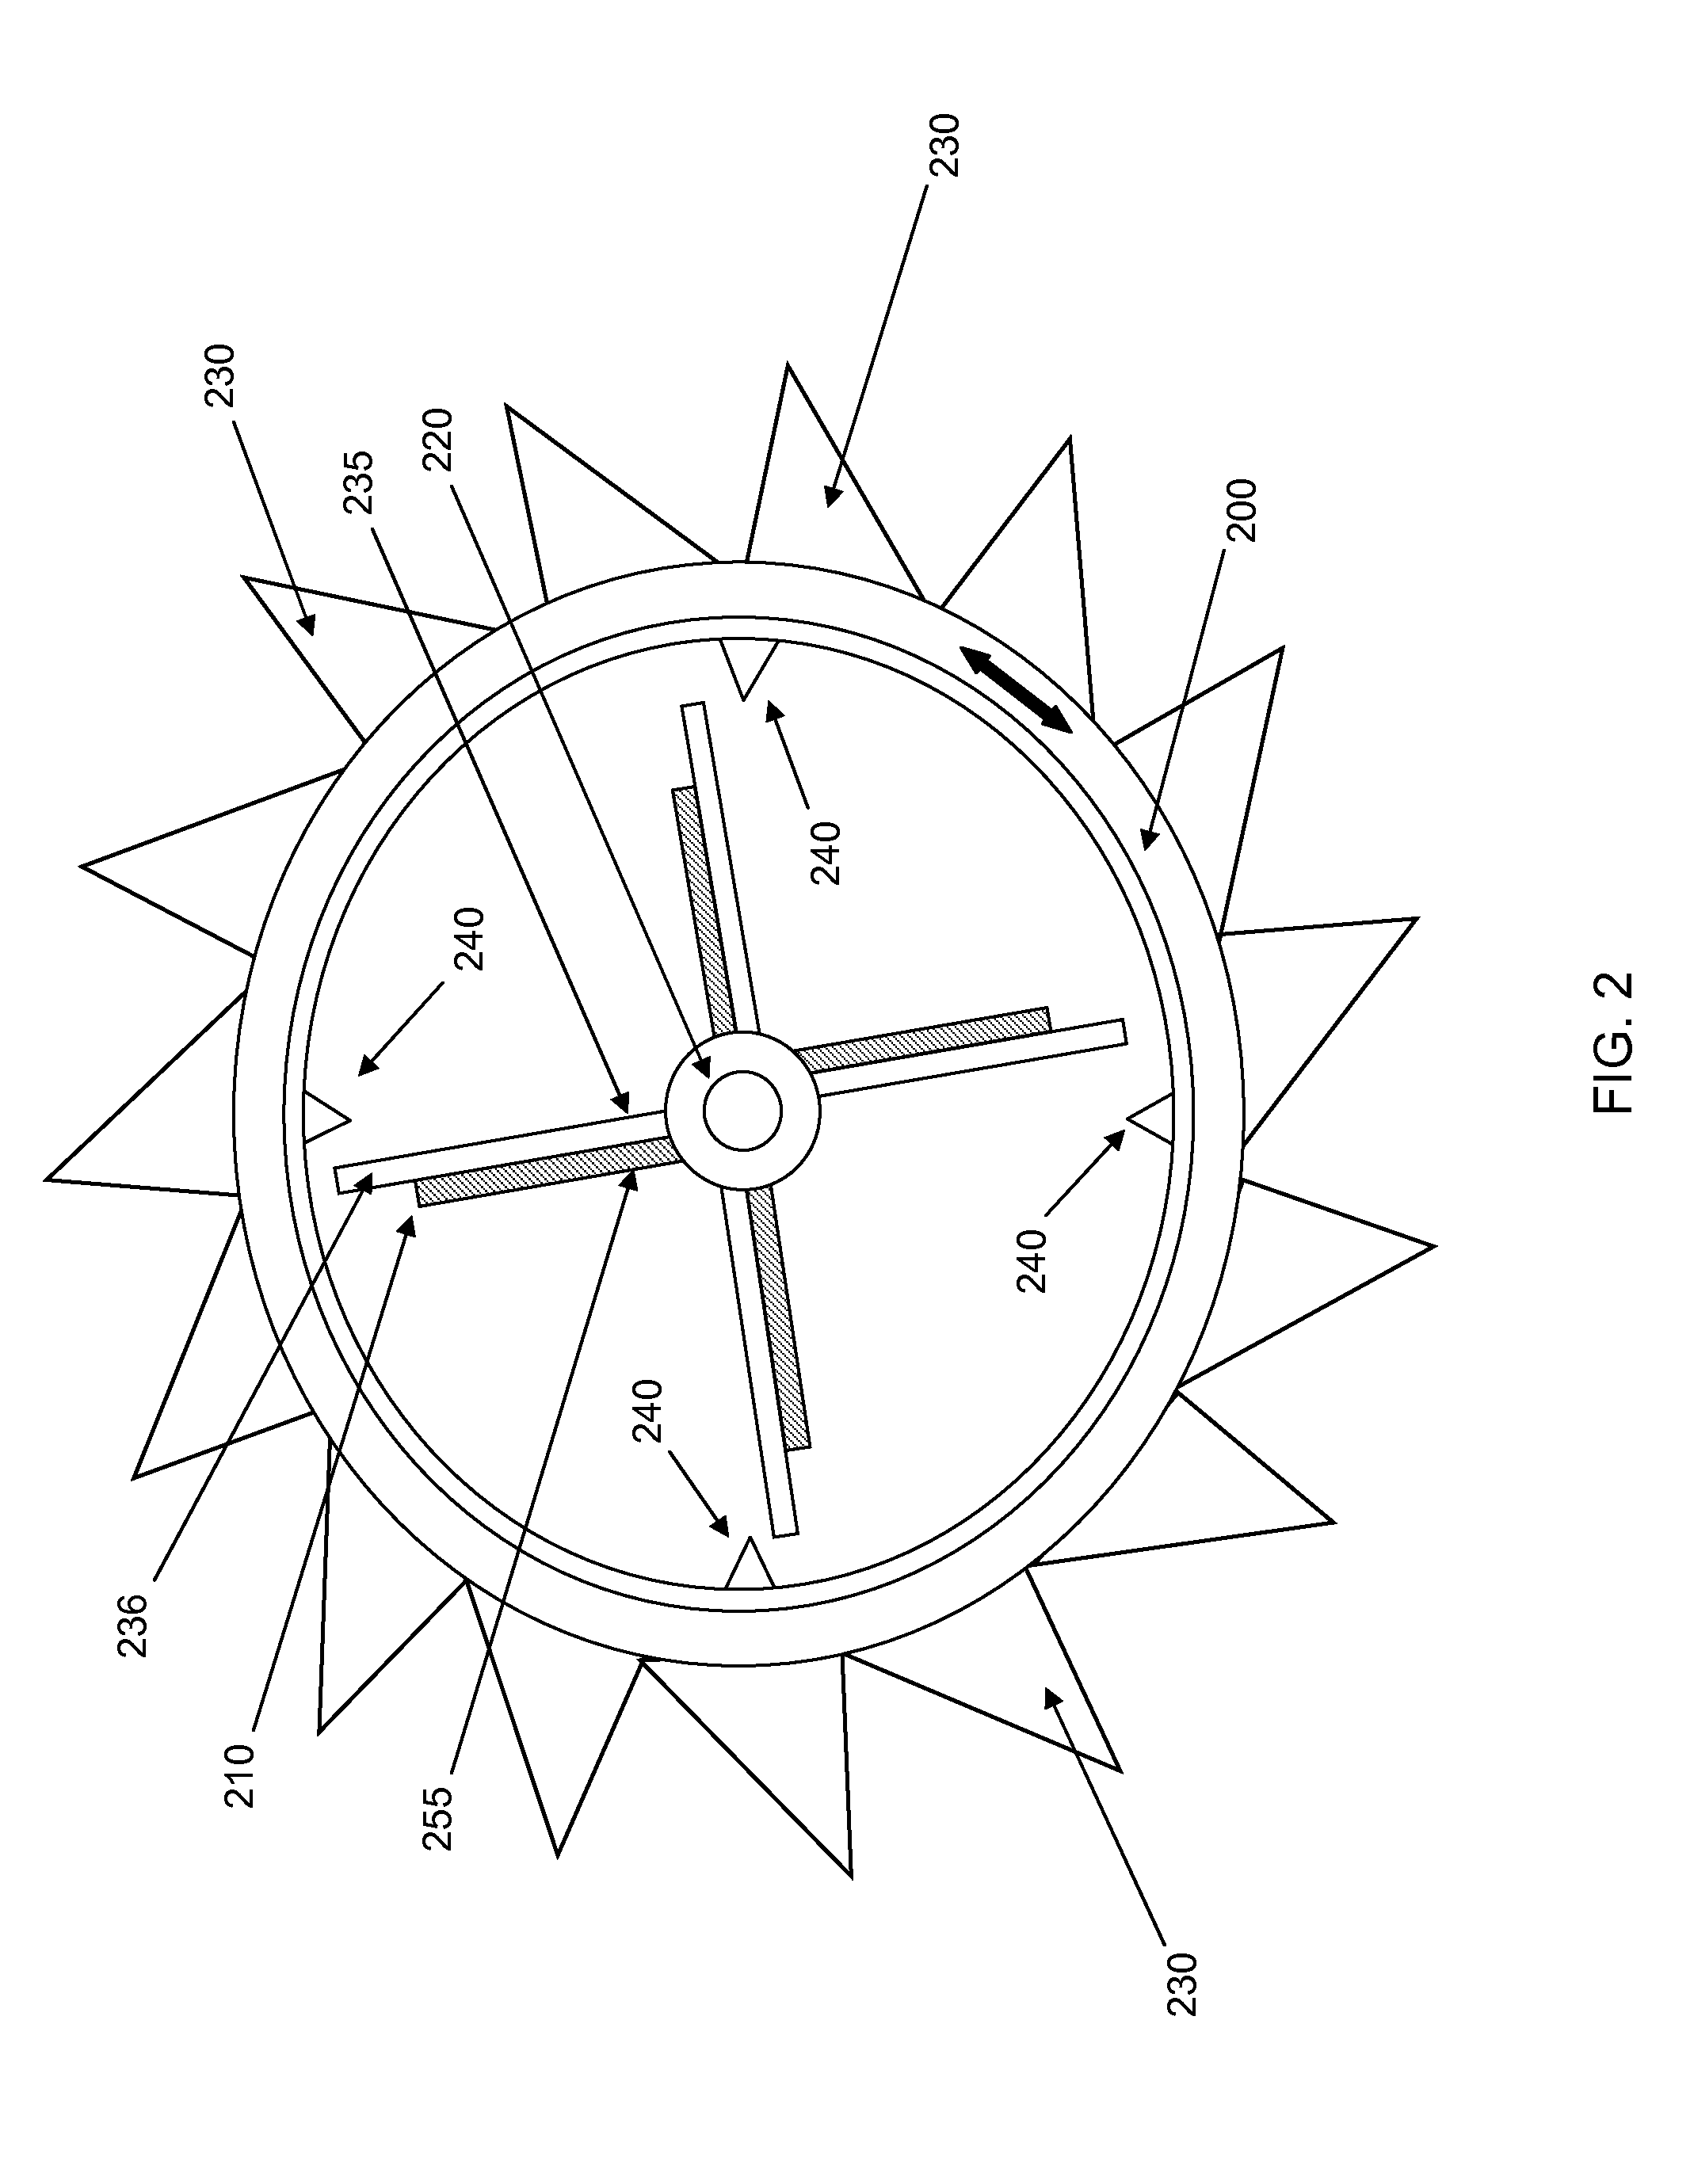 Method and System for Fluid Wave Energy Conversion